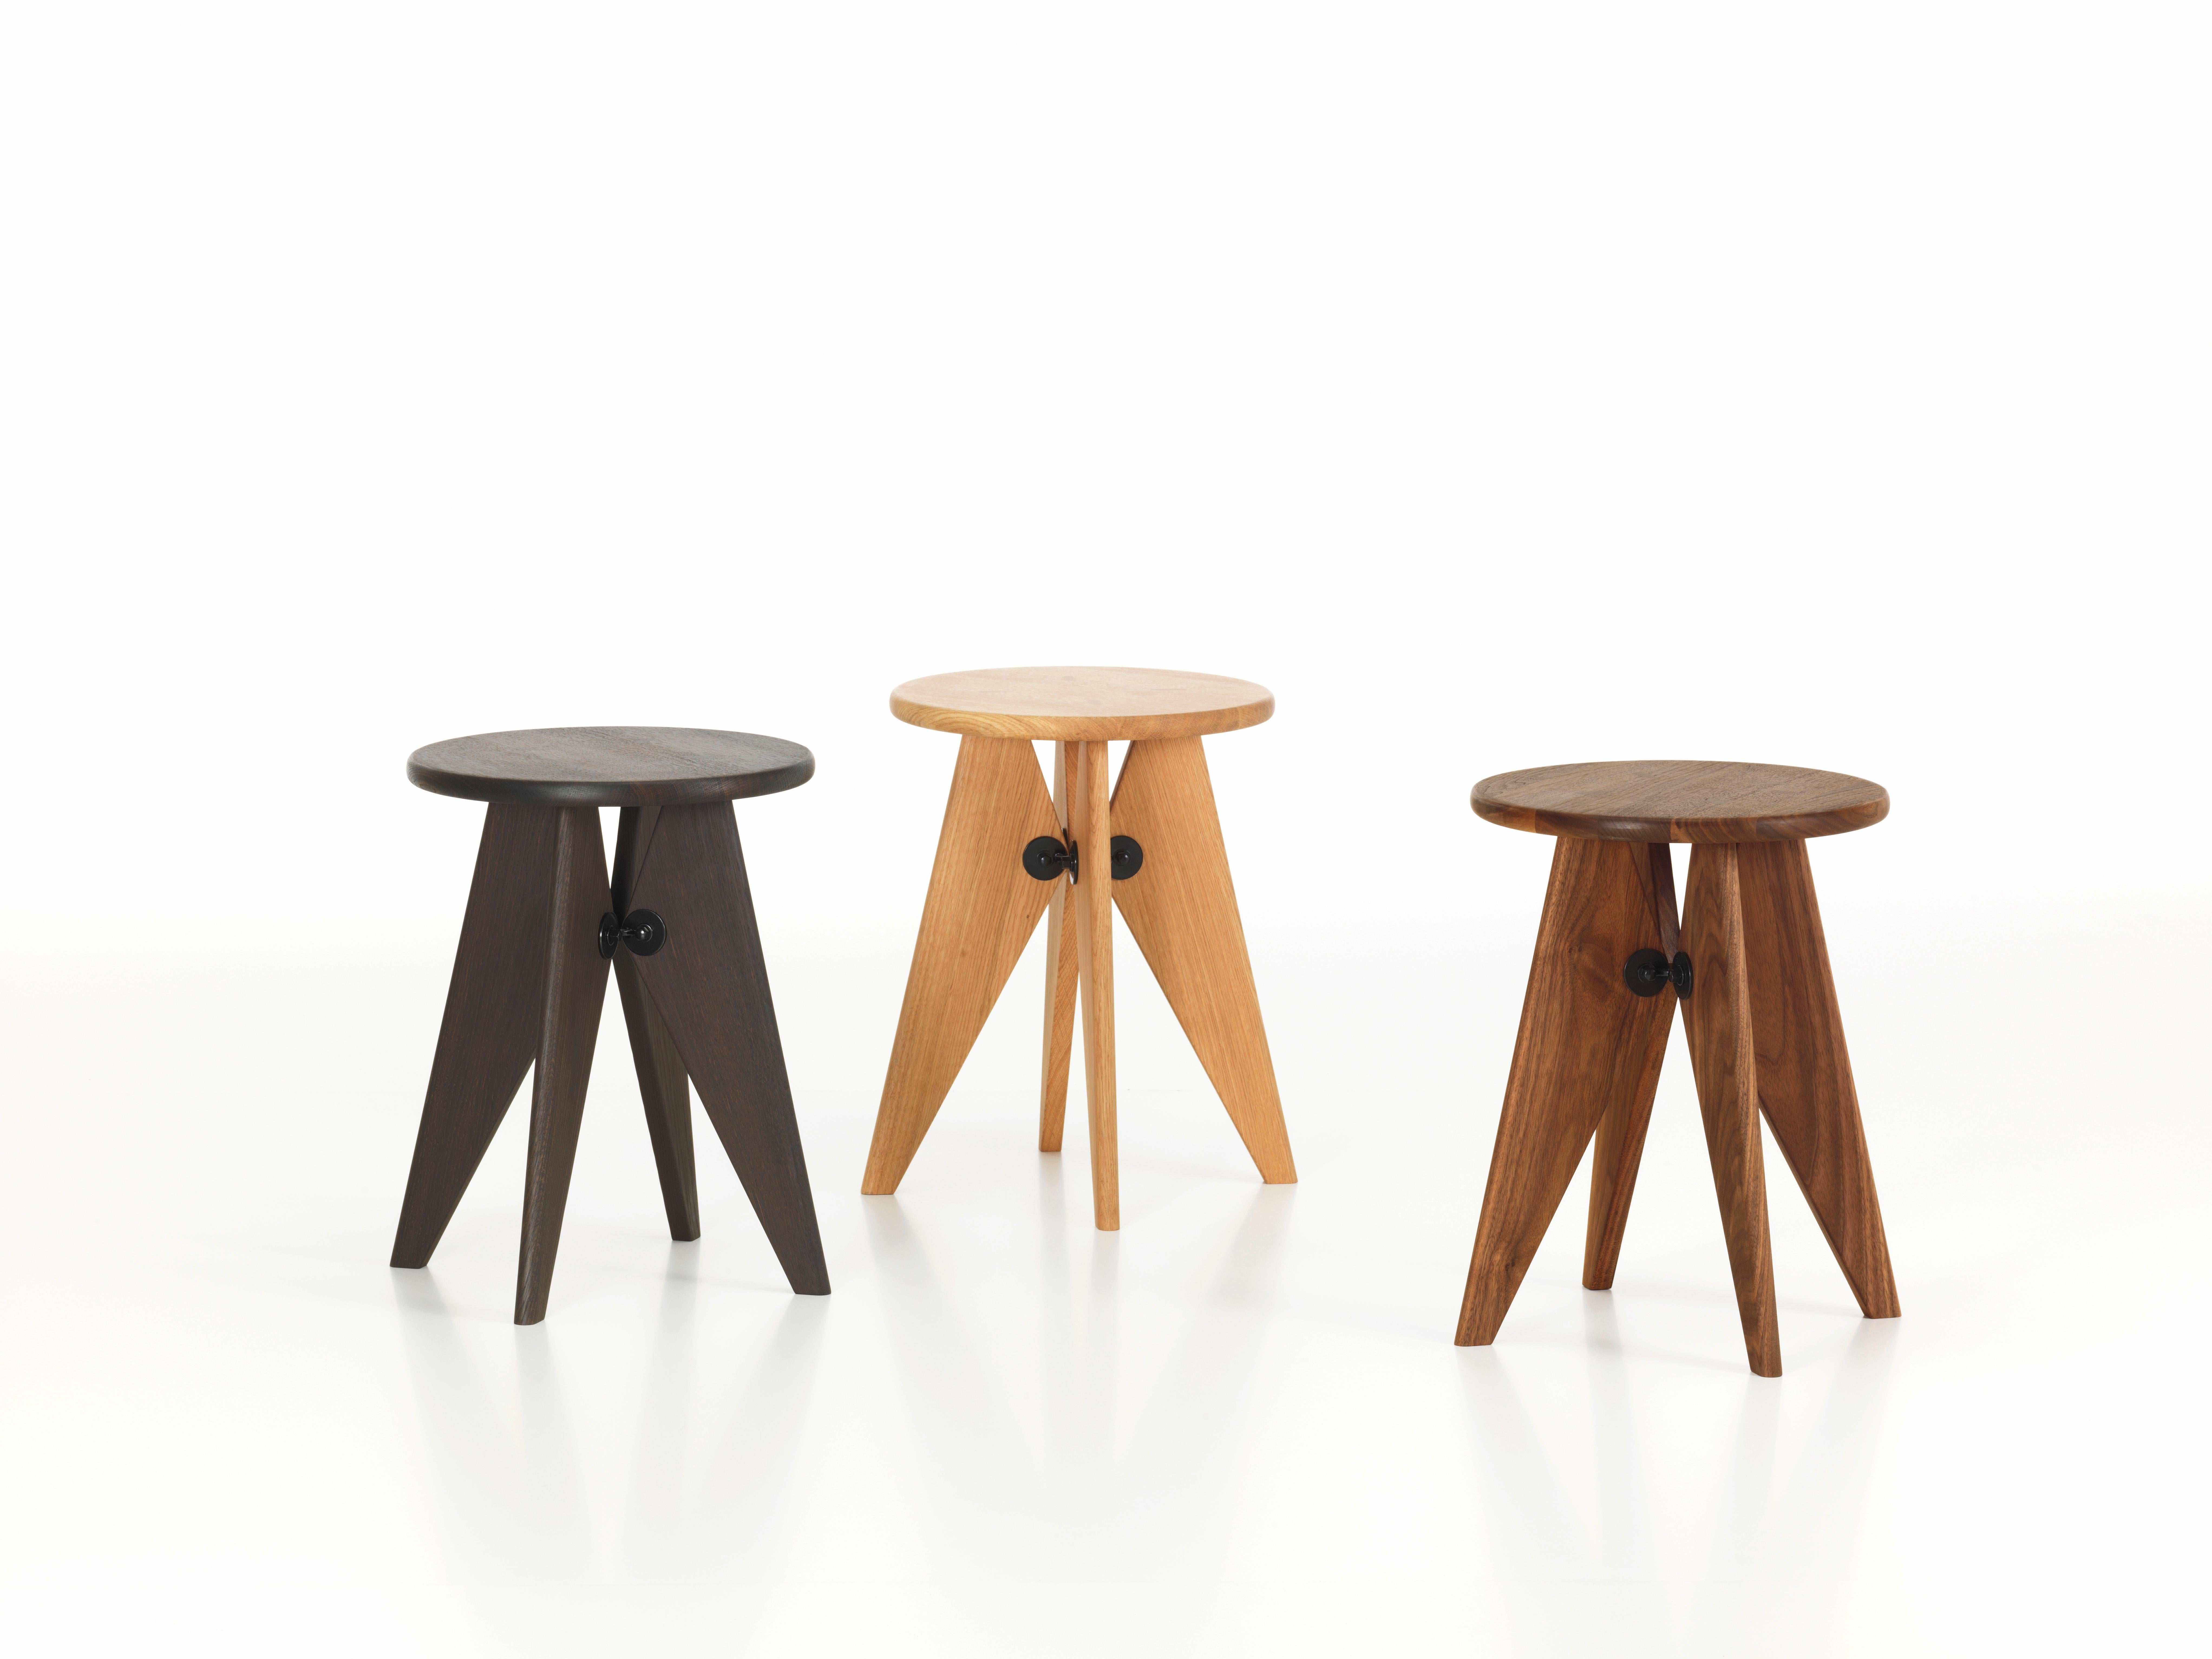 These items are currently only available in the United States.

Tabouret Solvay is a simple, robust stool made of solid wood that reveals the designer’s signature at first glance: its clear structural principles can be found throughout the work of